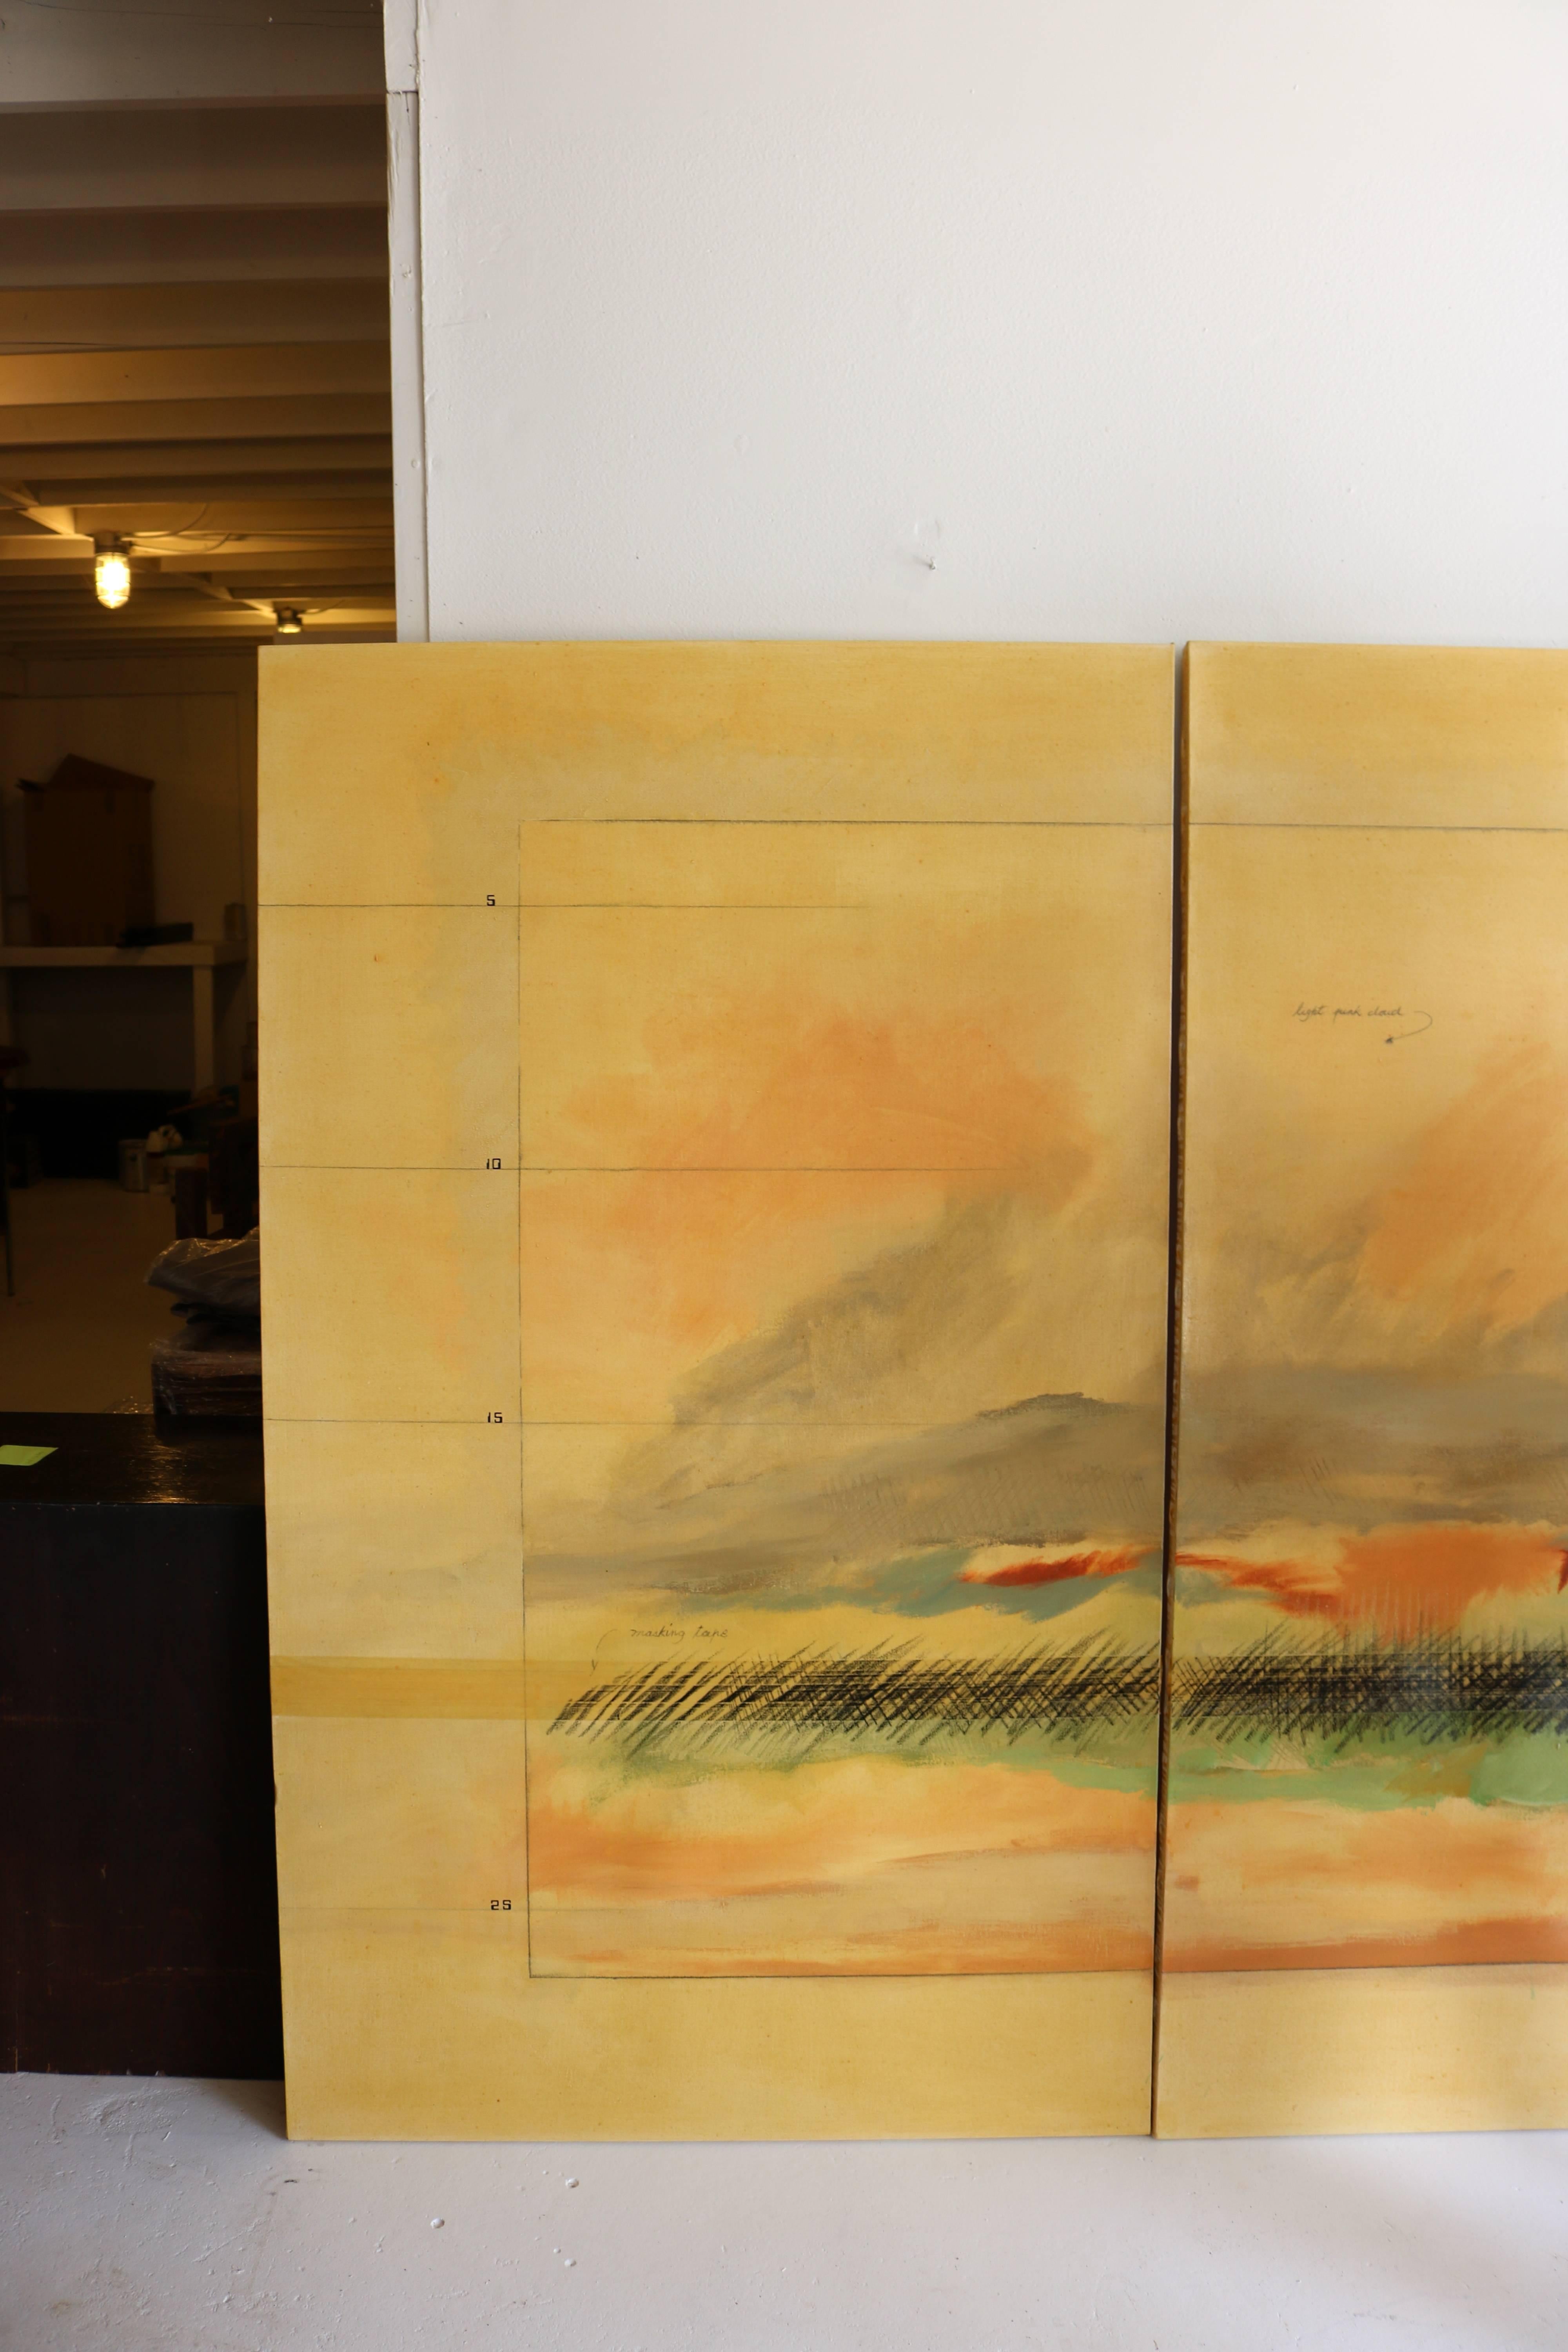 This large-scale triptych is signed Savoie (Robert Savoie, Canadian, b.1939) and seems to depict a passing rain storm across the open-plains. The muted coloration give the piece a sense of calm and peace.

